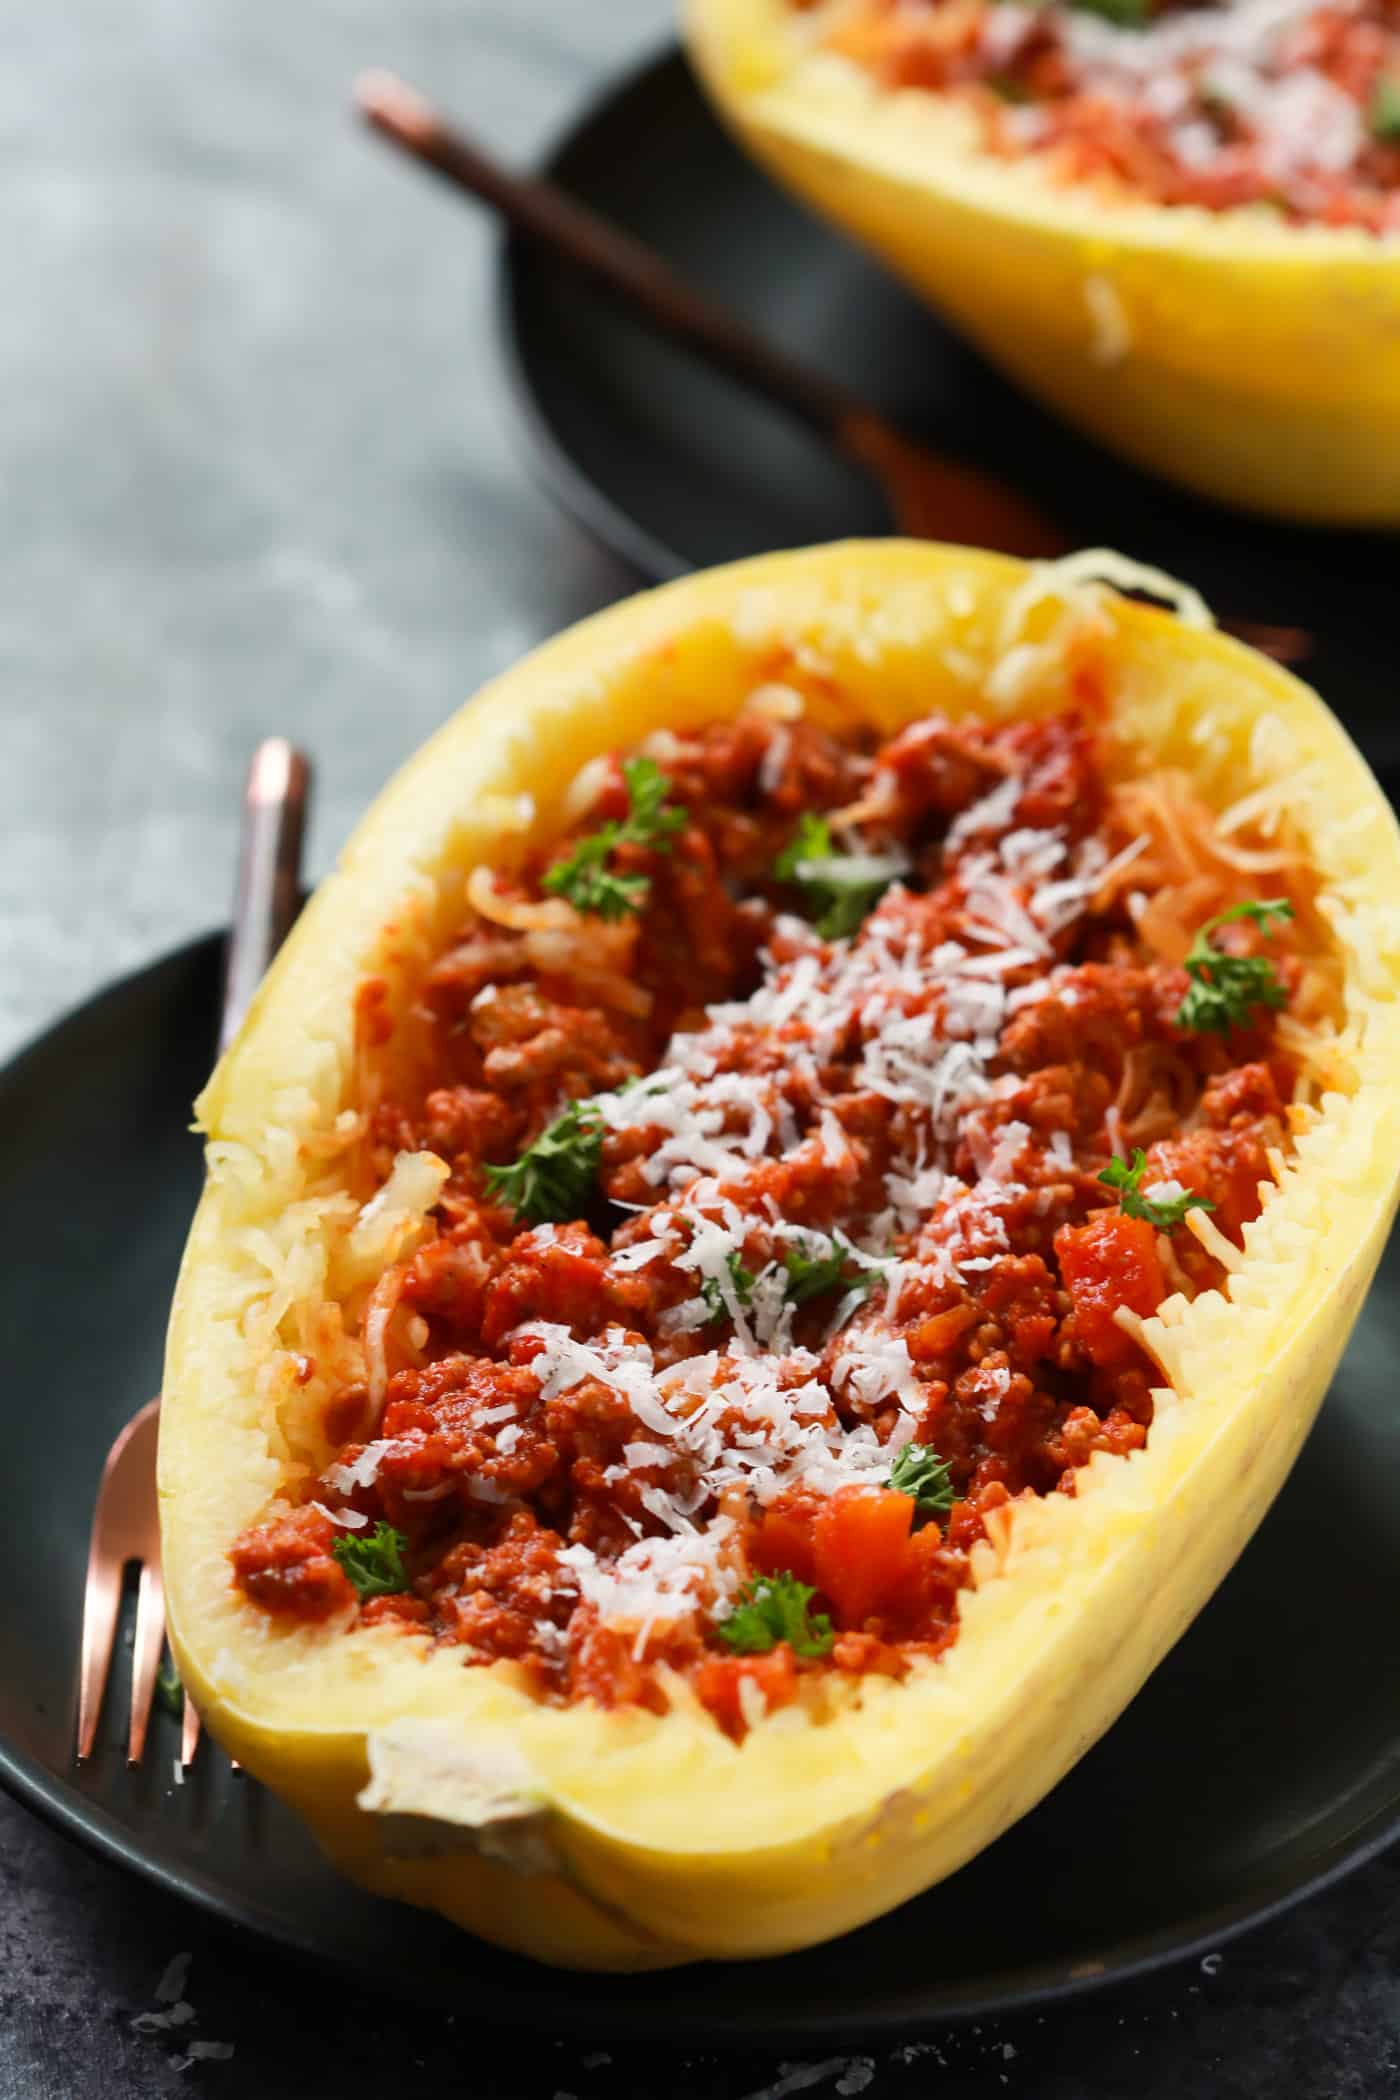 Comforting Food doesn’t need to be full of carbs, right? I can prove what I’m saying with this super delicious Easy Bolognese Stuffed Spaghetti Squash recipe. It’s also gluten-free and paleo friendly. Enjoy!